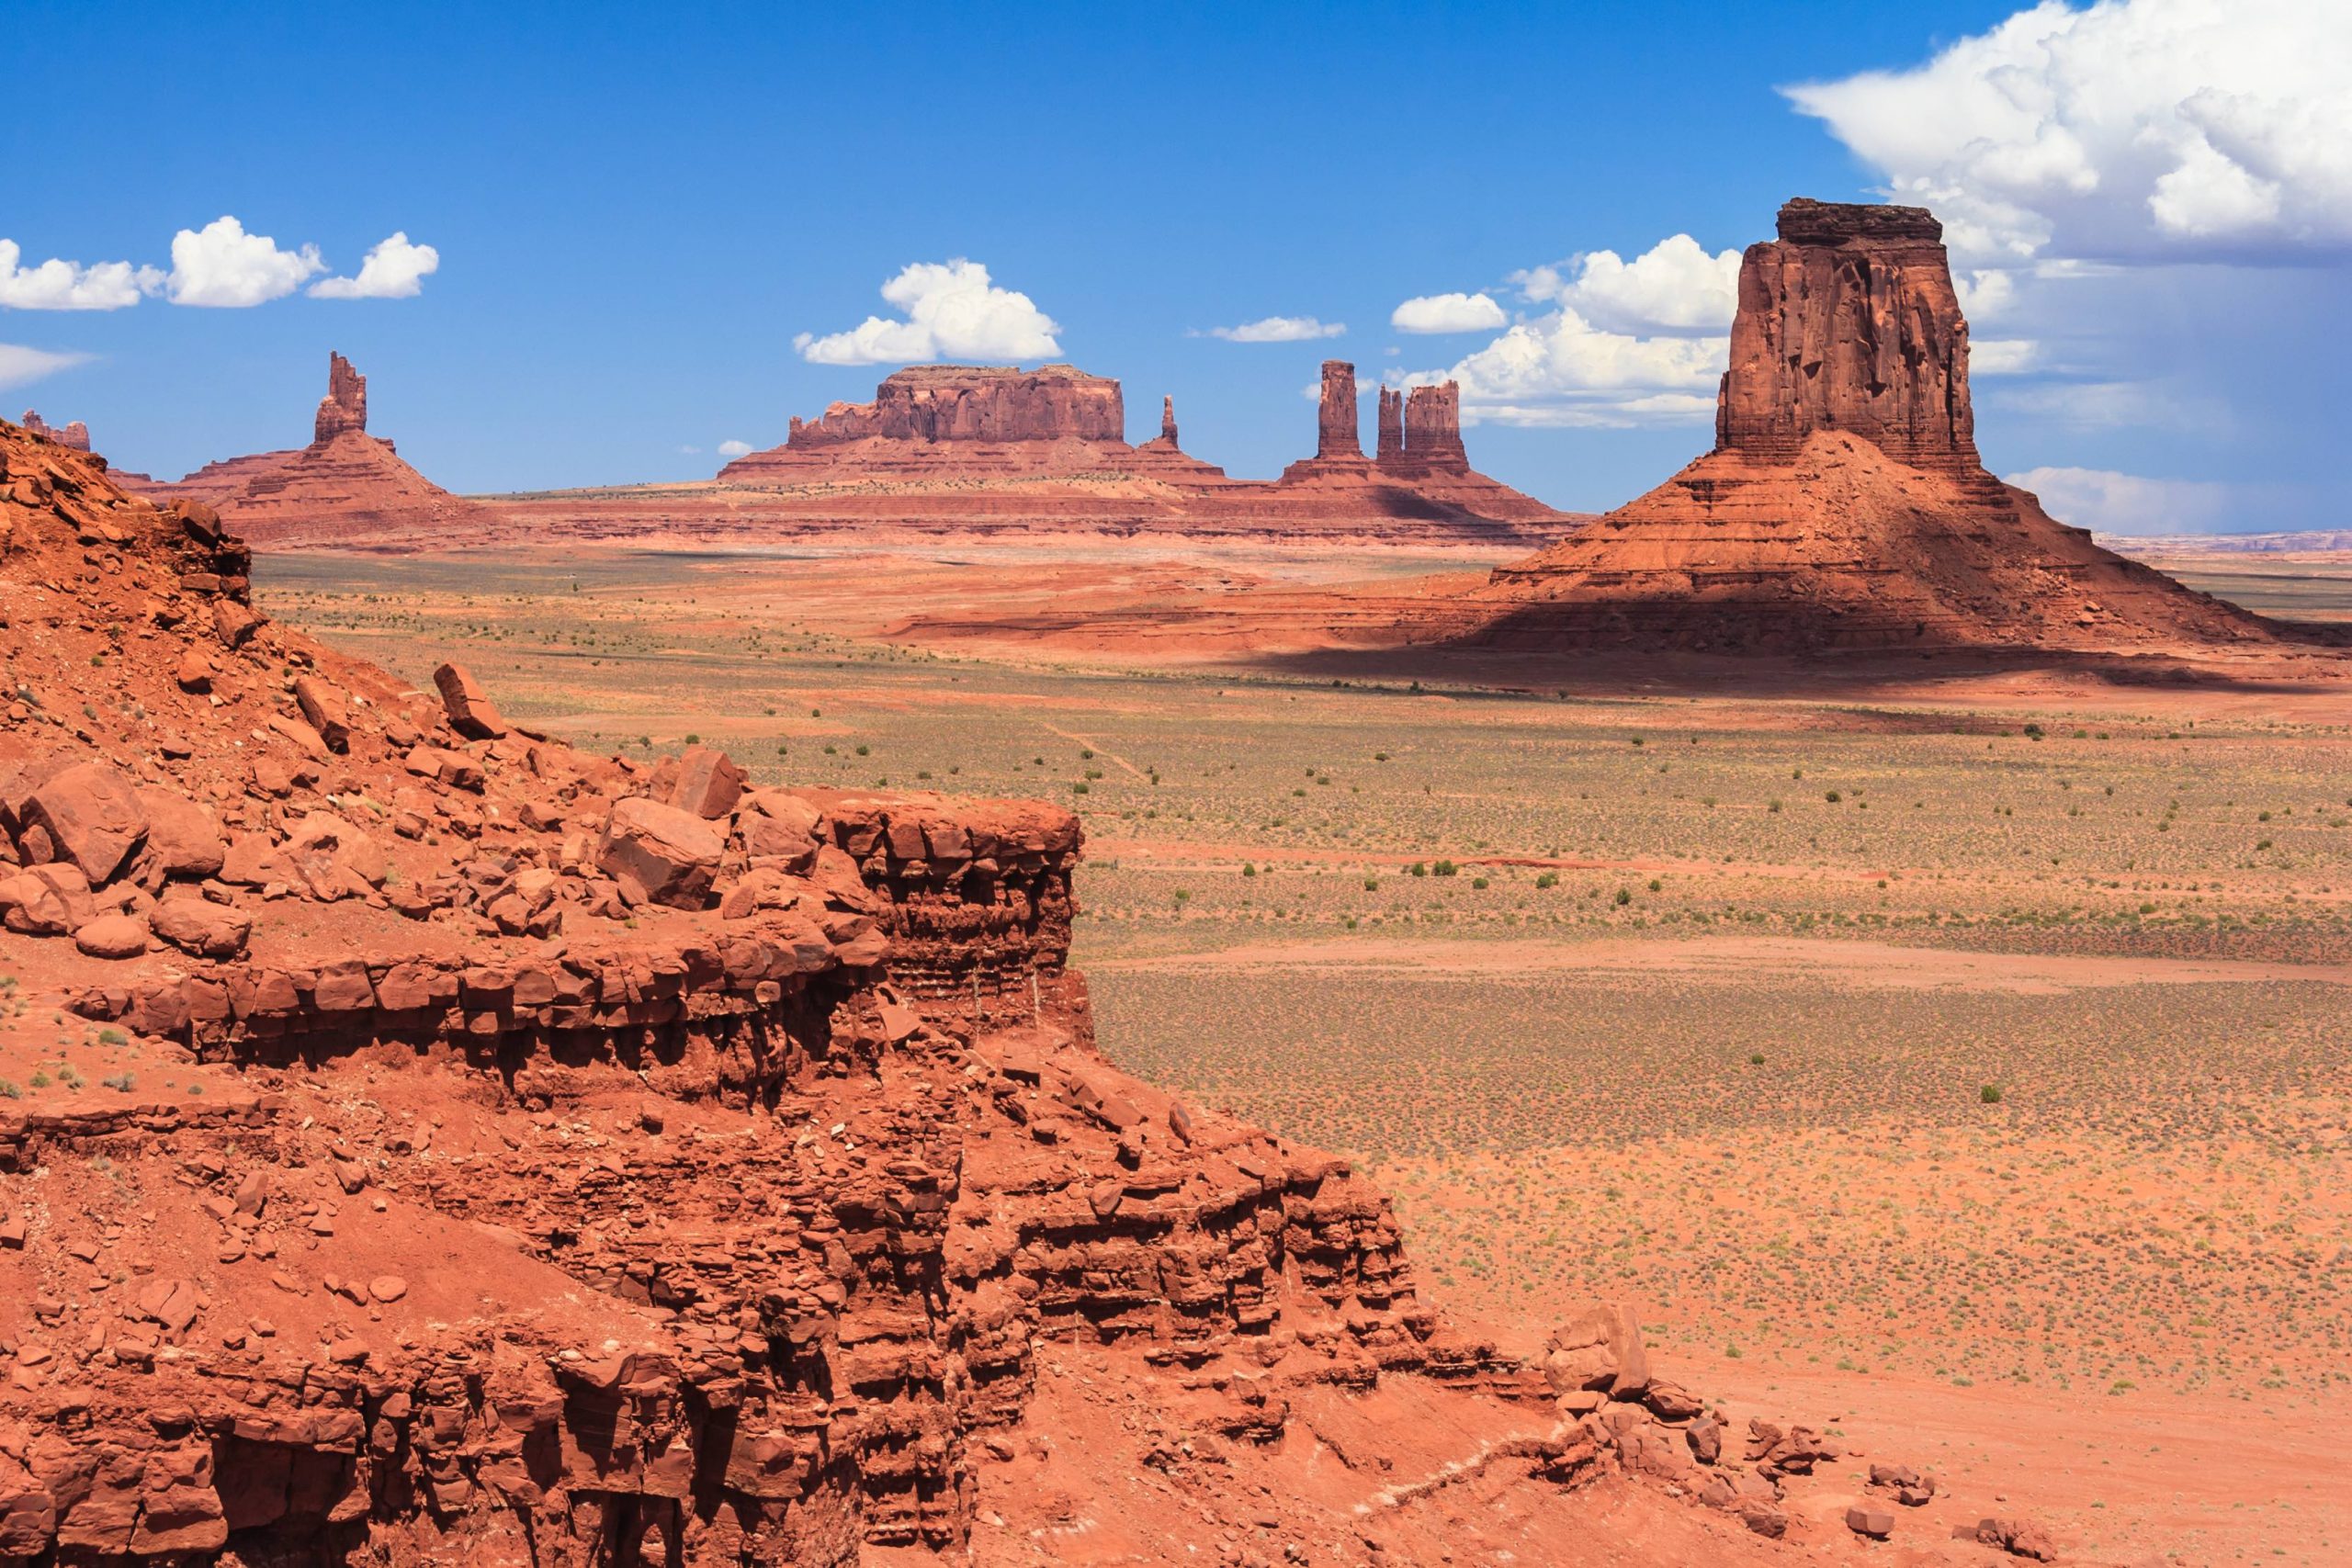 Landscape of Monument Valley desert in the Navajo Nation